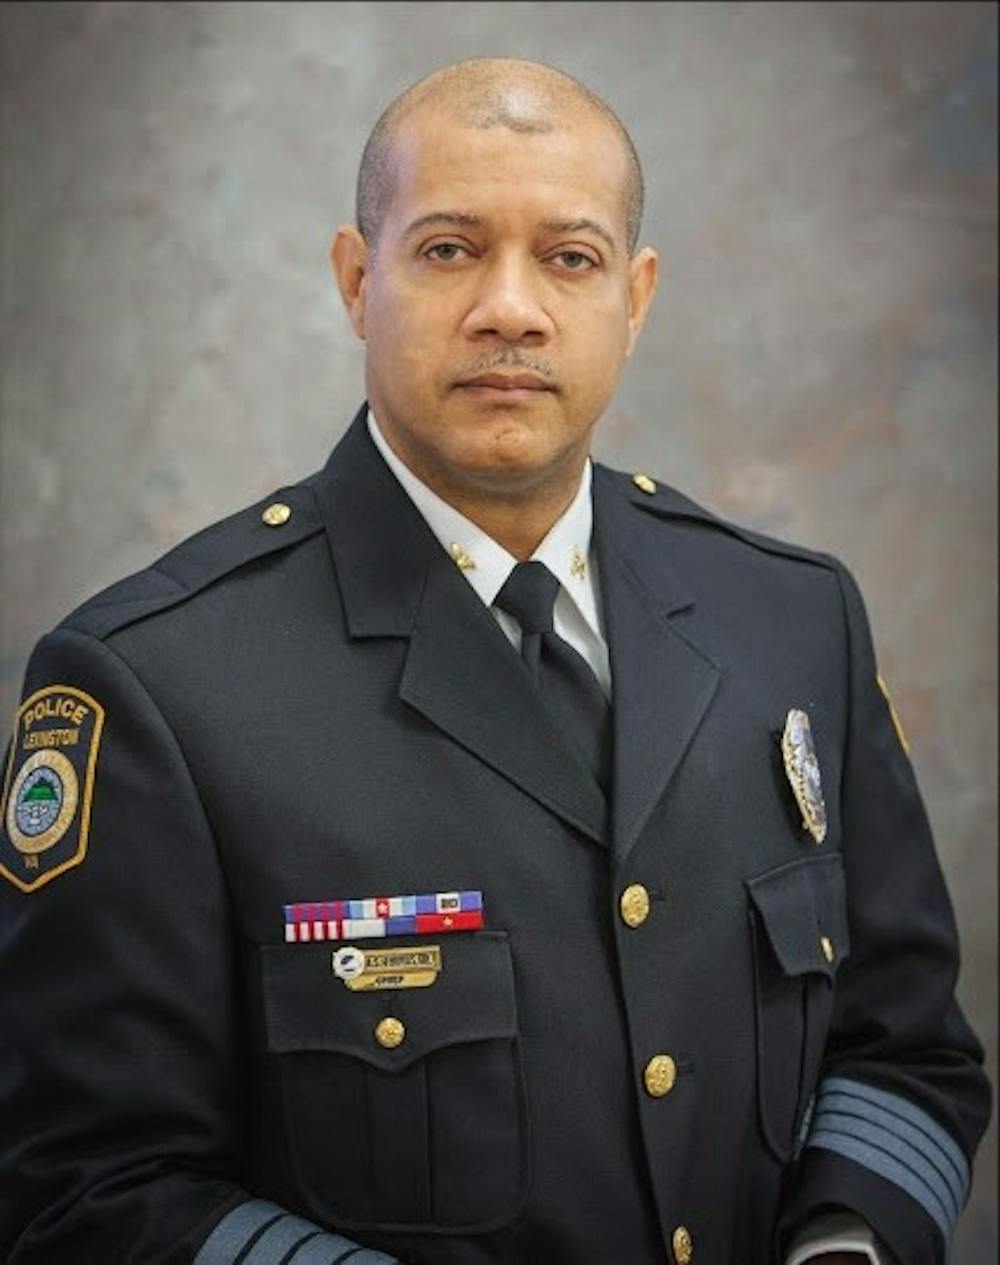 <p>Thomas will replace current Chief Tim Longo, who announced his May 1 retirement in Nov. 2015, and will be the first African-American chief of police for Charlottesville.</p>